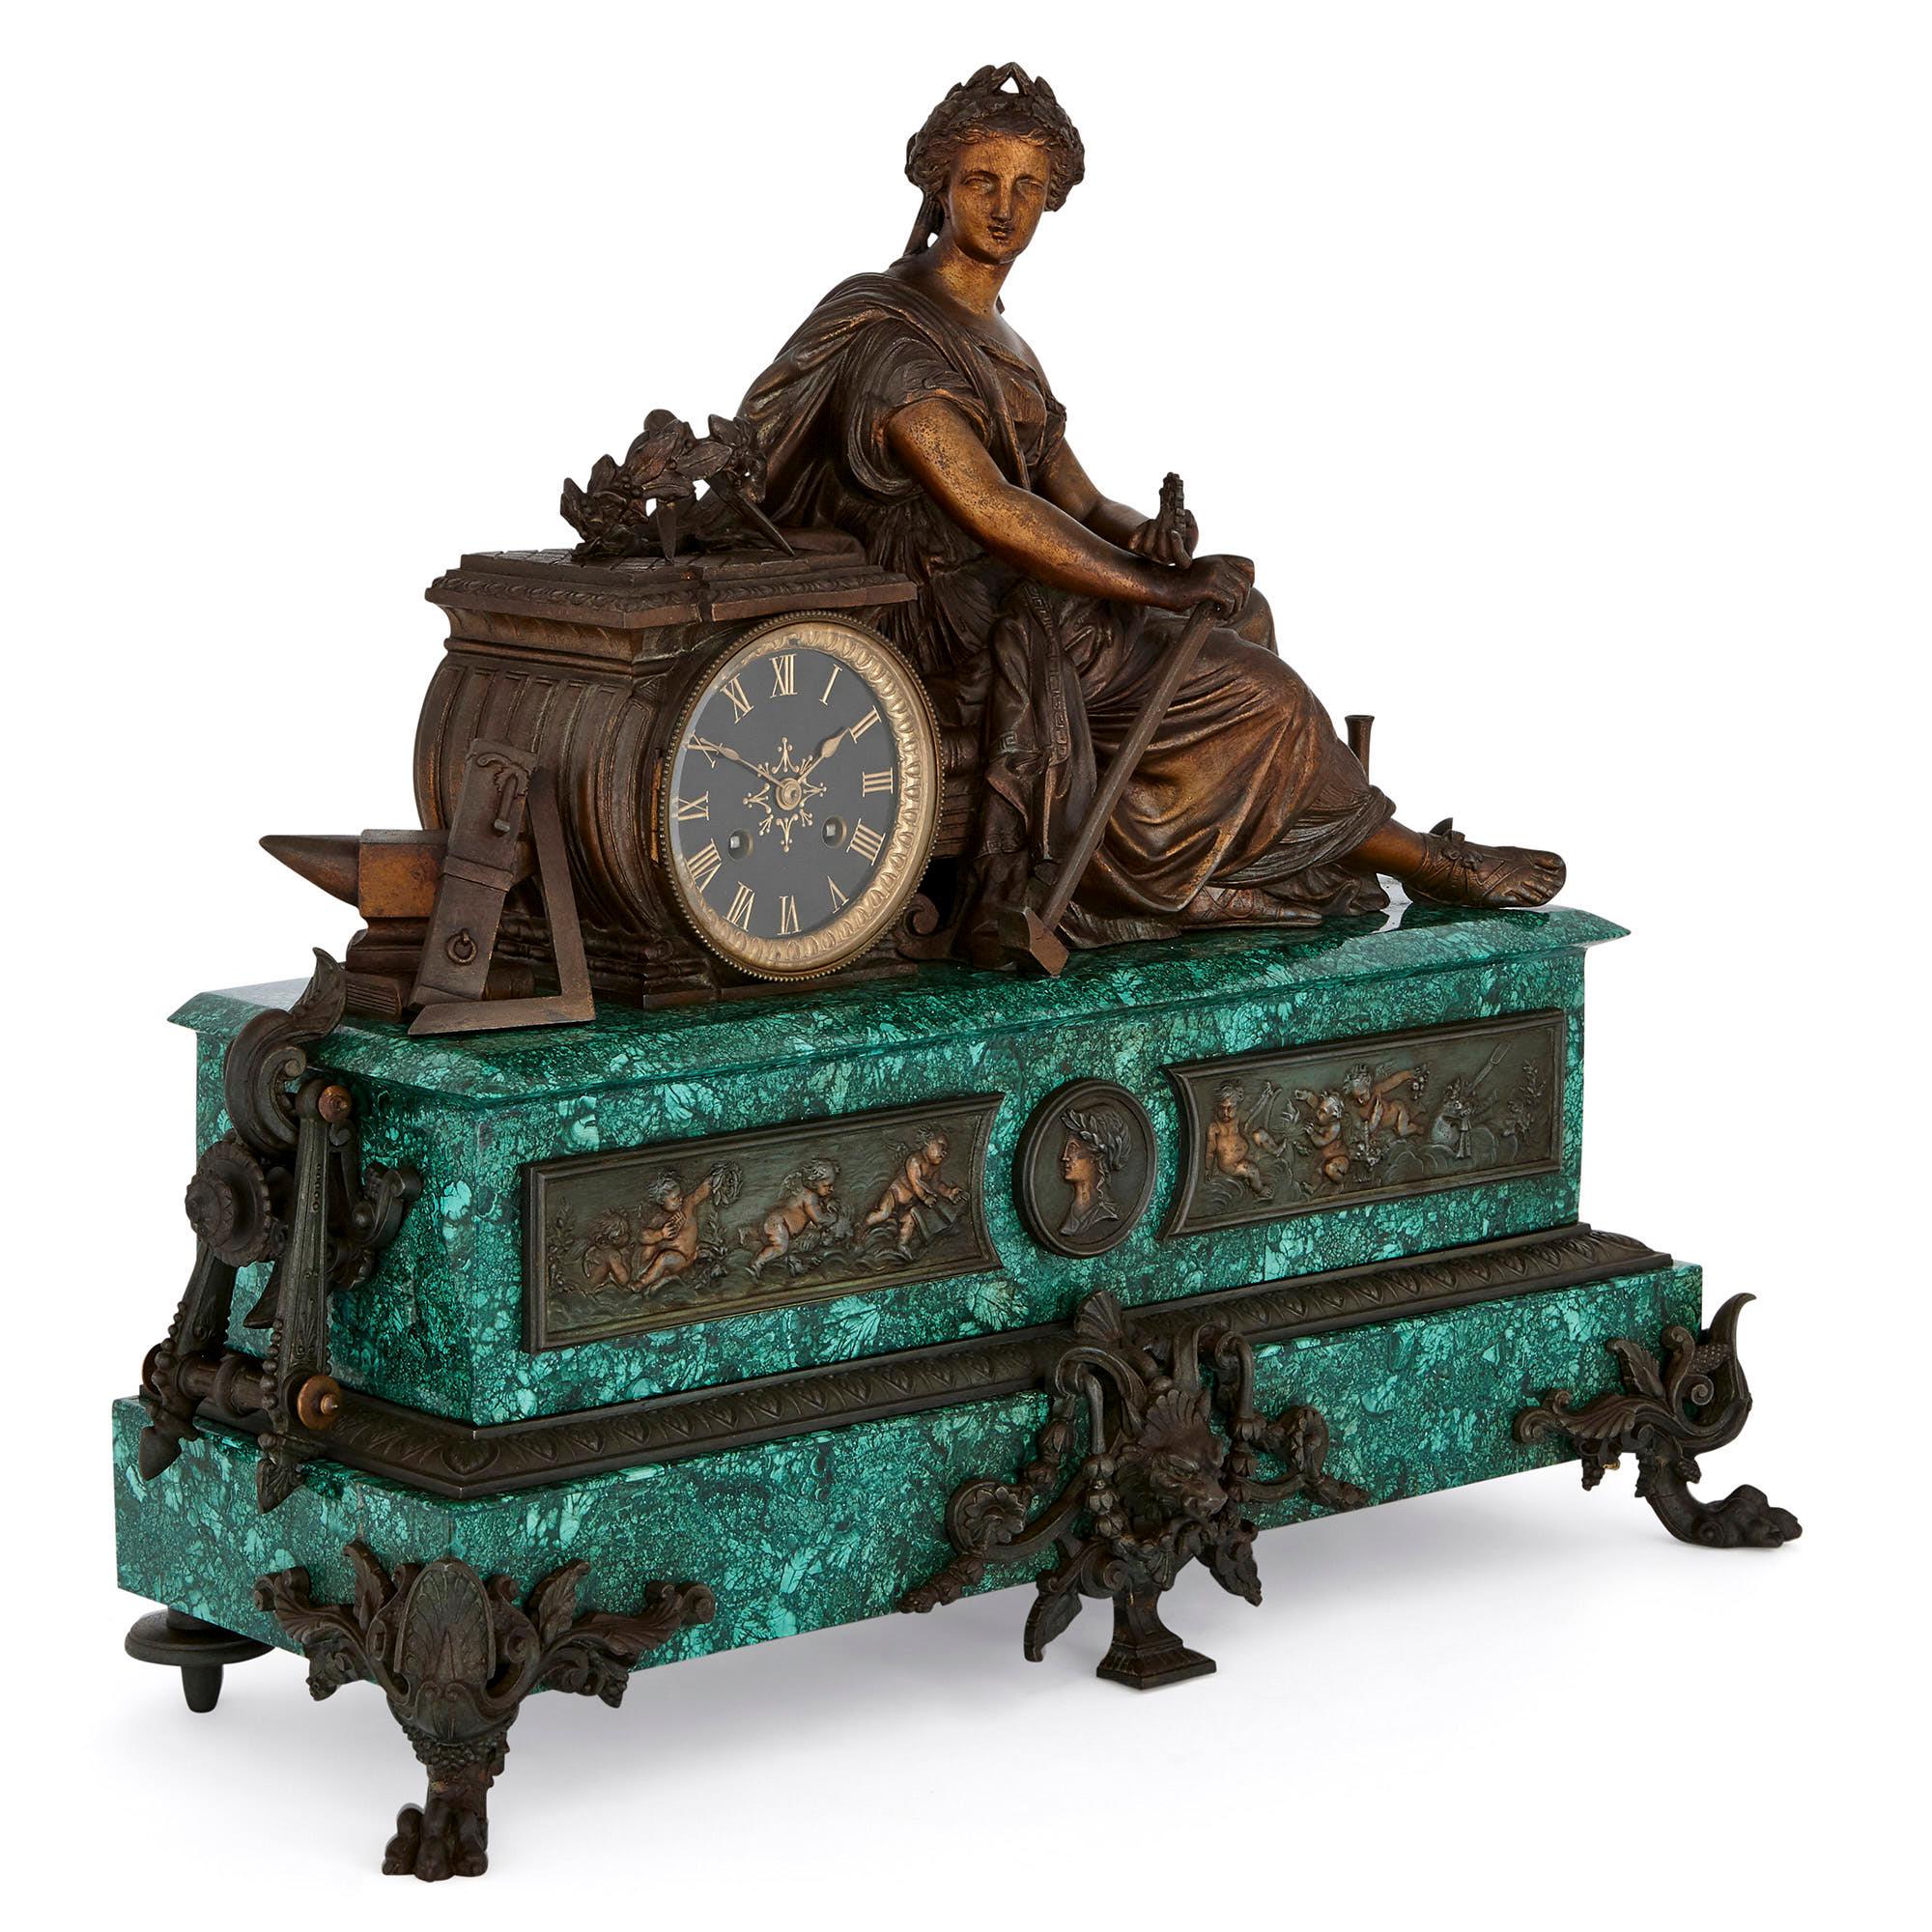 This beautiful clock was crafted in France in the late 19th century. The clock is a monument to this period of industrialisation and technological innovation, being decorated with an allegory of Labour.

Labour is depicted in patinated spelter as